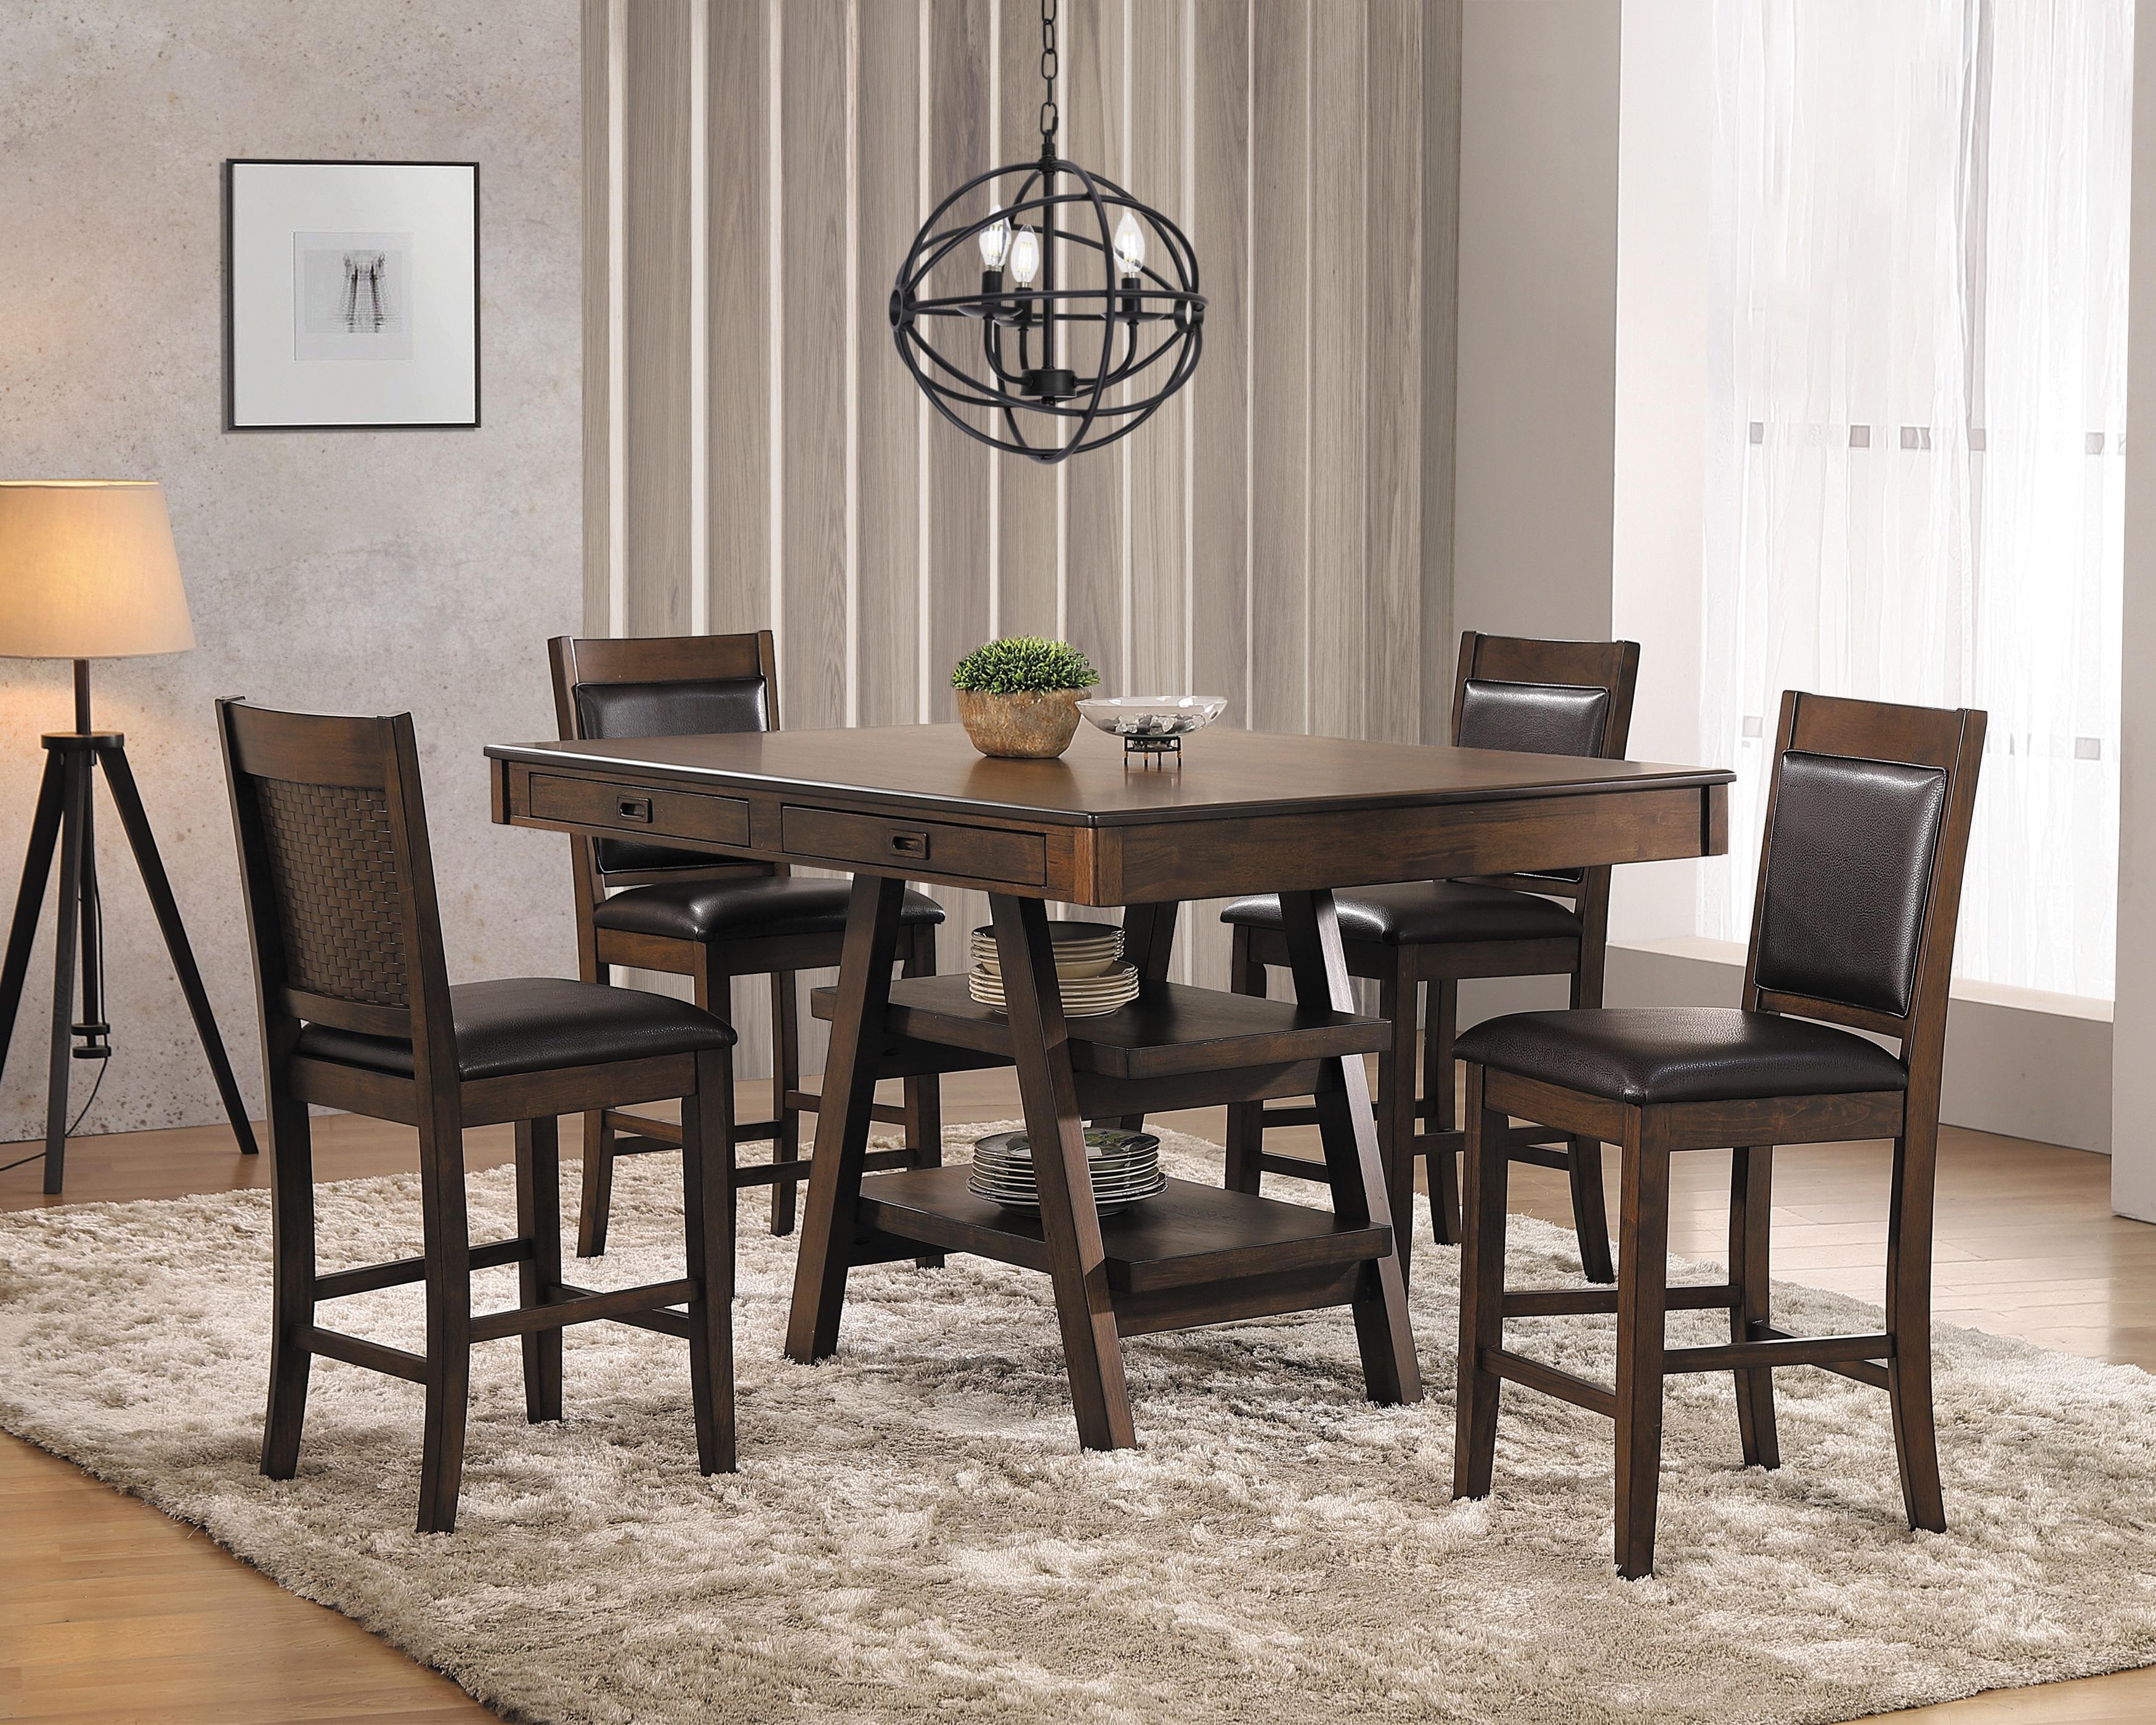 Transitional Dining Room Set 115208-S5 Dewey 115208-S5 in Walnut Leatherette